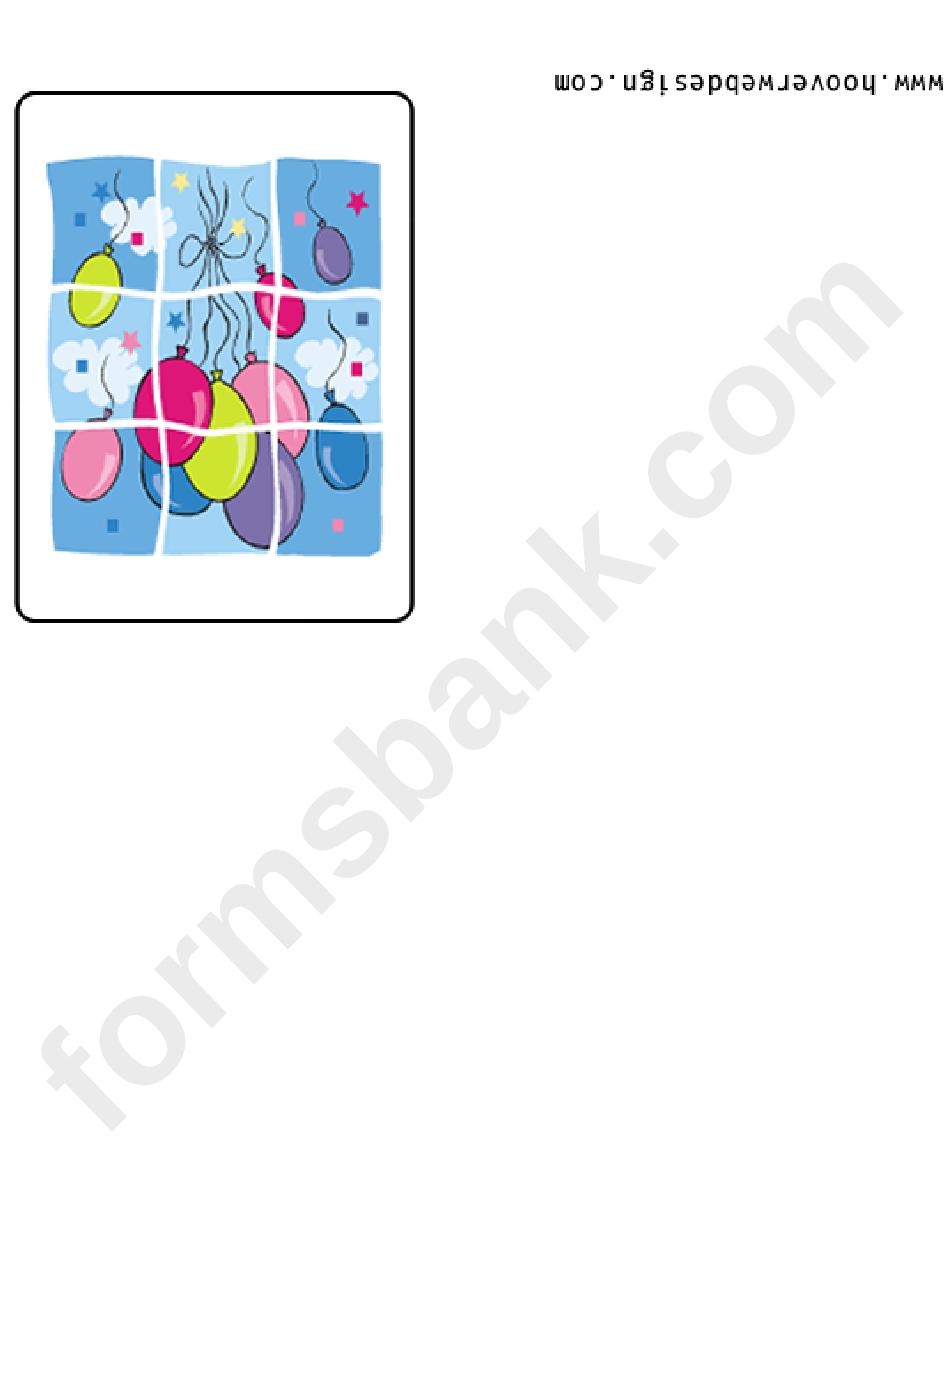 Balloons - Greeting Card Template